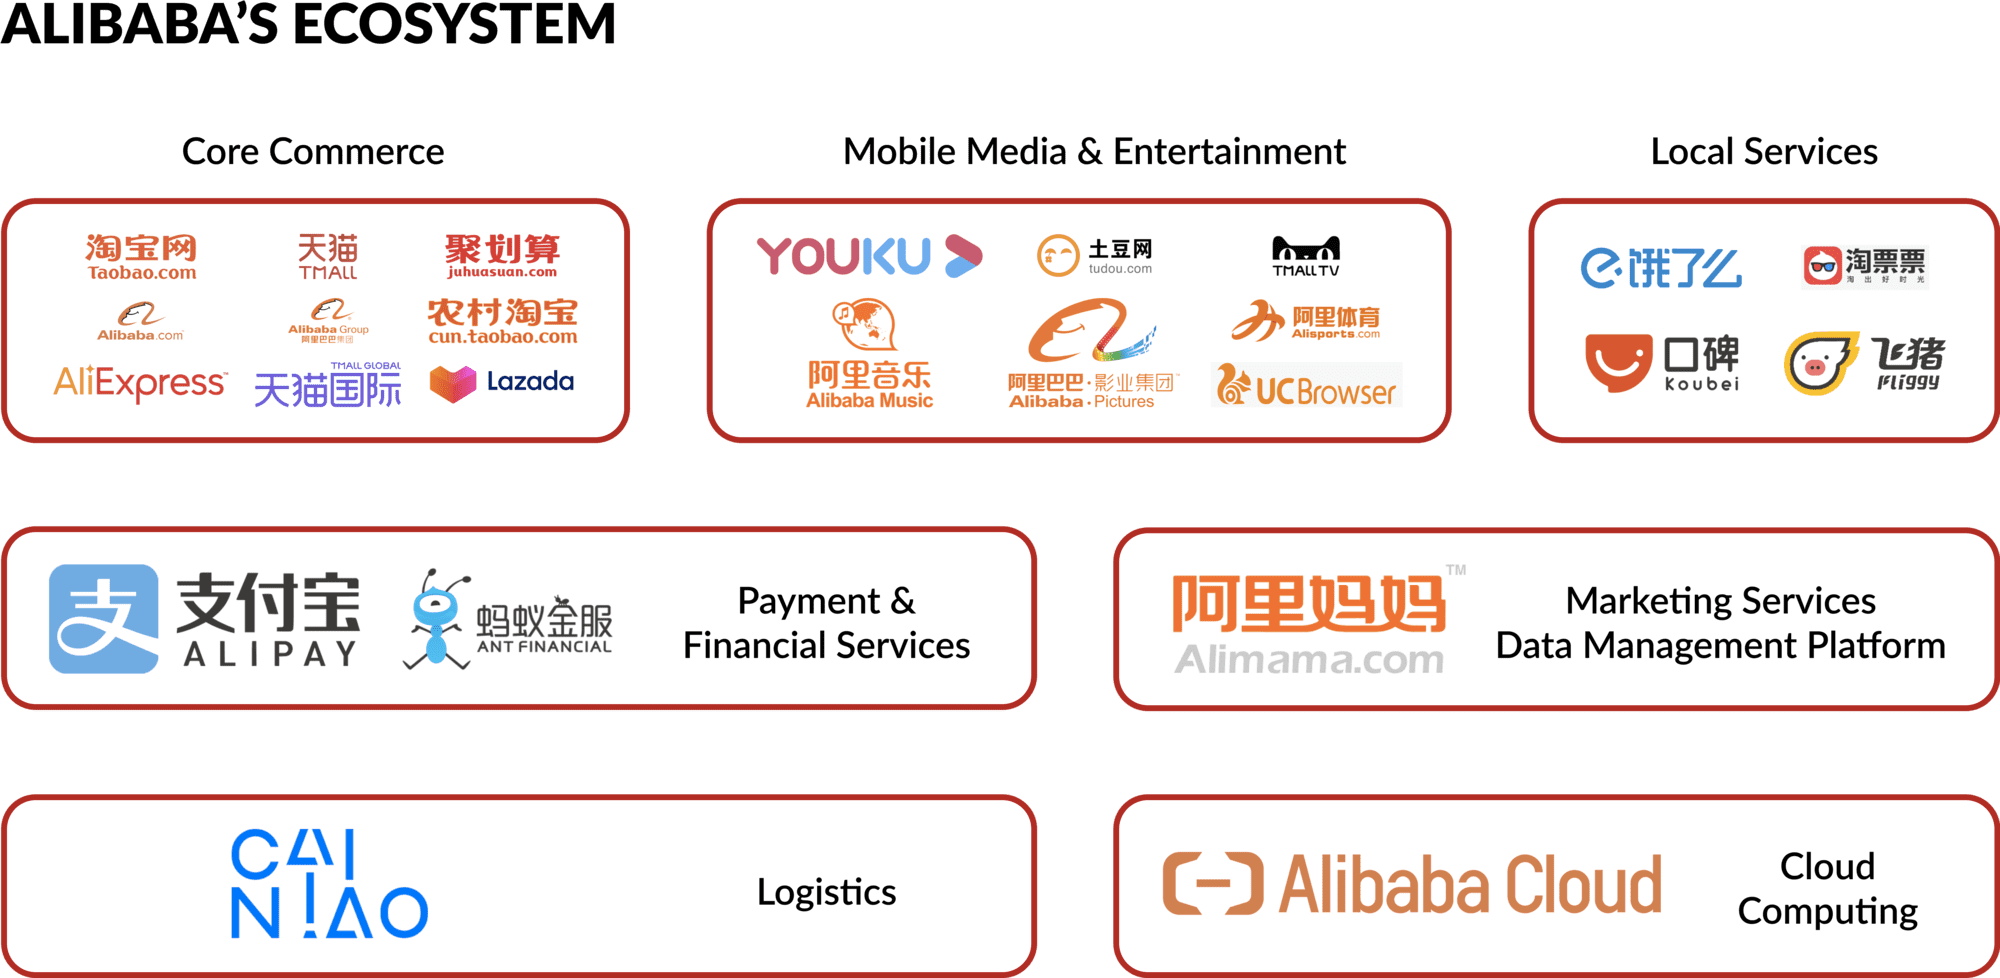 Alibaba's ecosystem with various platforms ranging from Core Commerce, Mobile Media & Entertainment, Local Services, Payment & Financial Services, Marketing Services & Data Management Platform, Logistics, and Cloud Computing